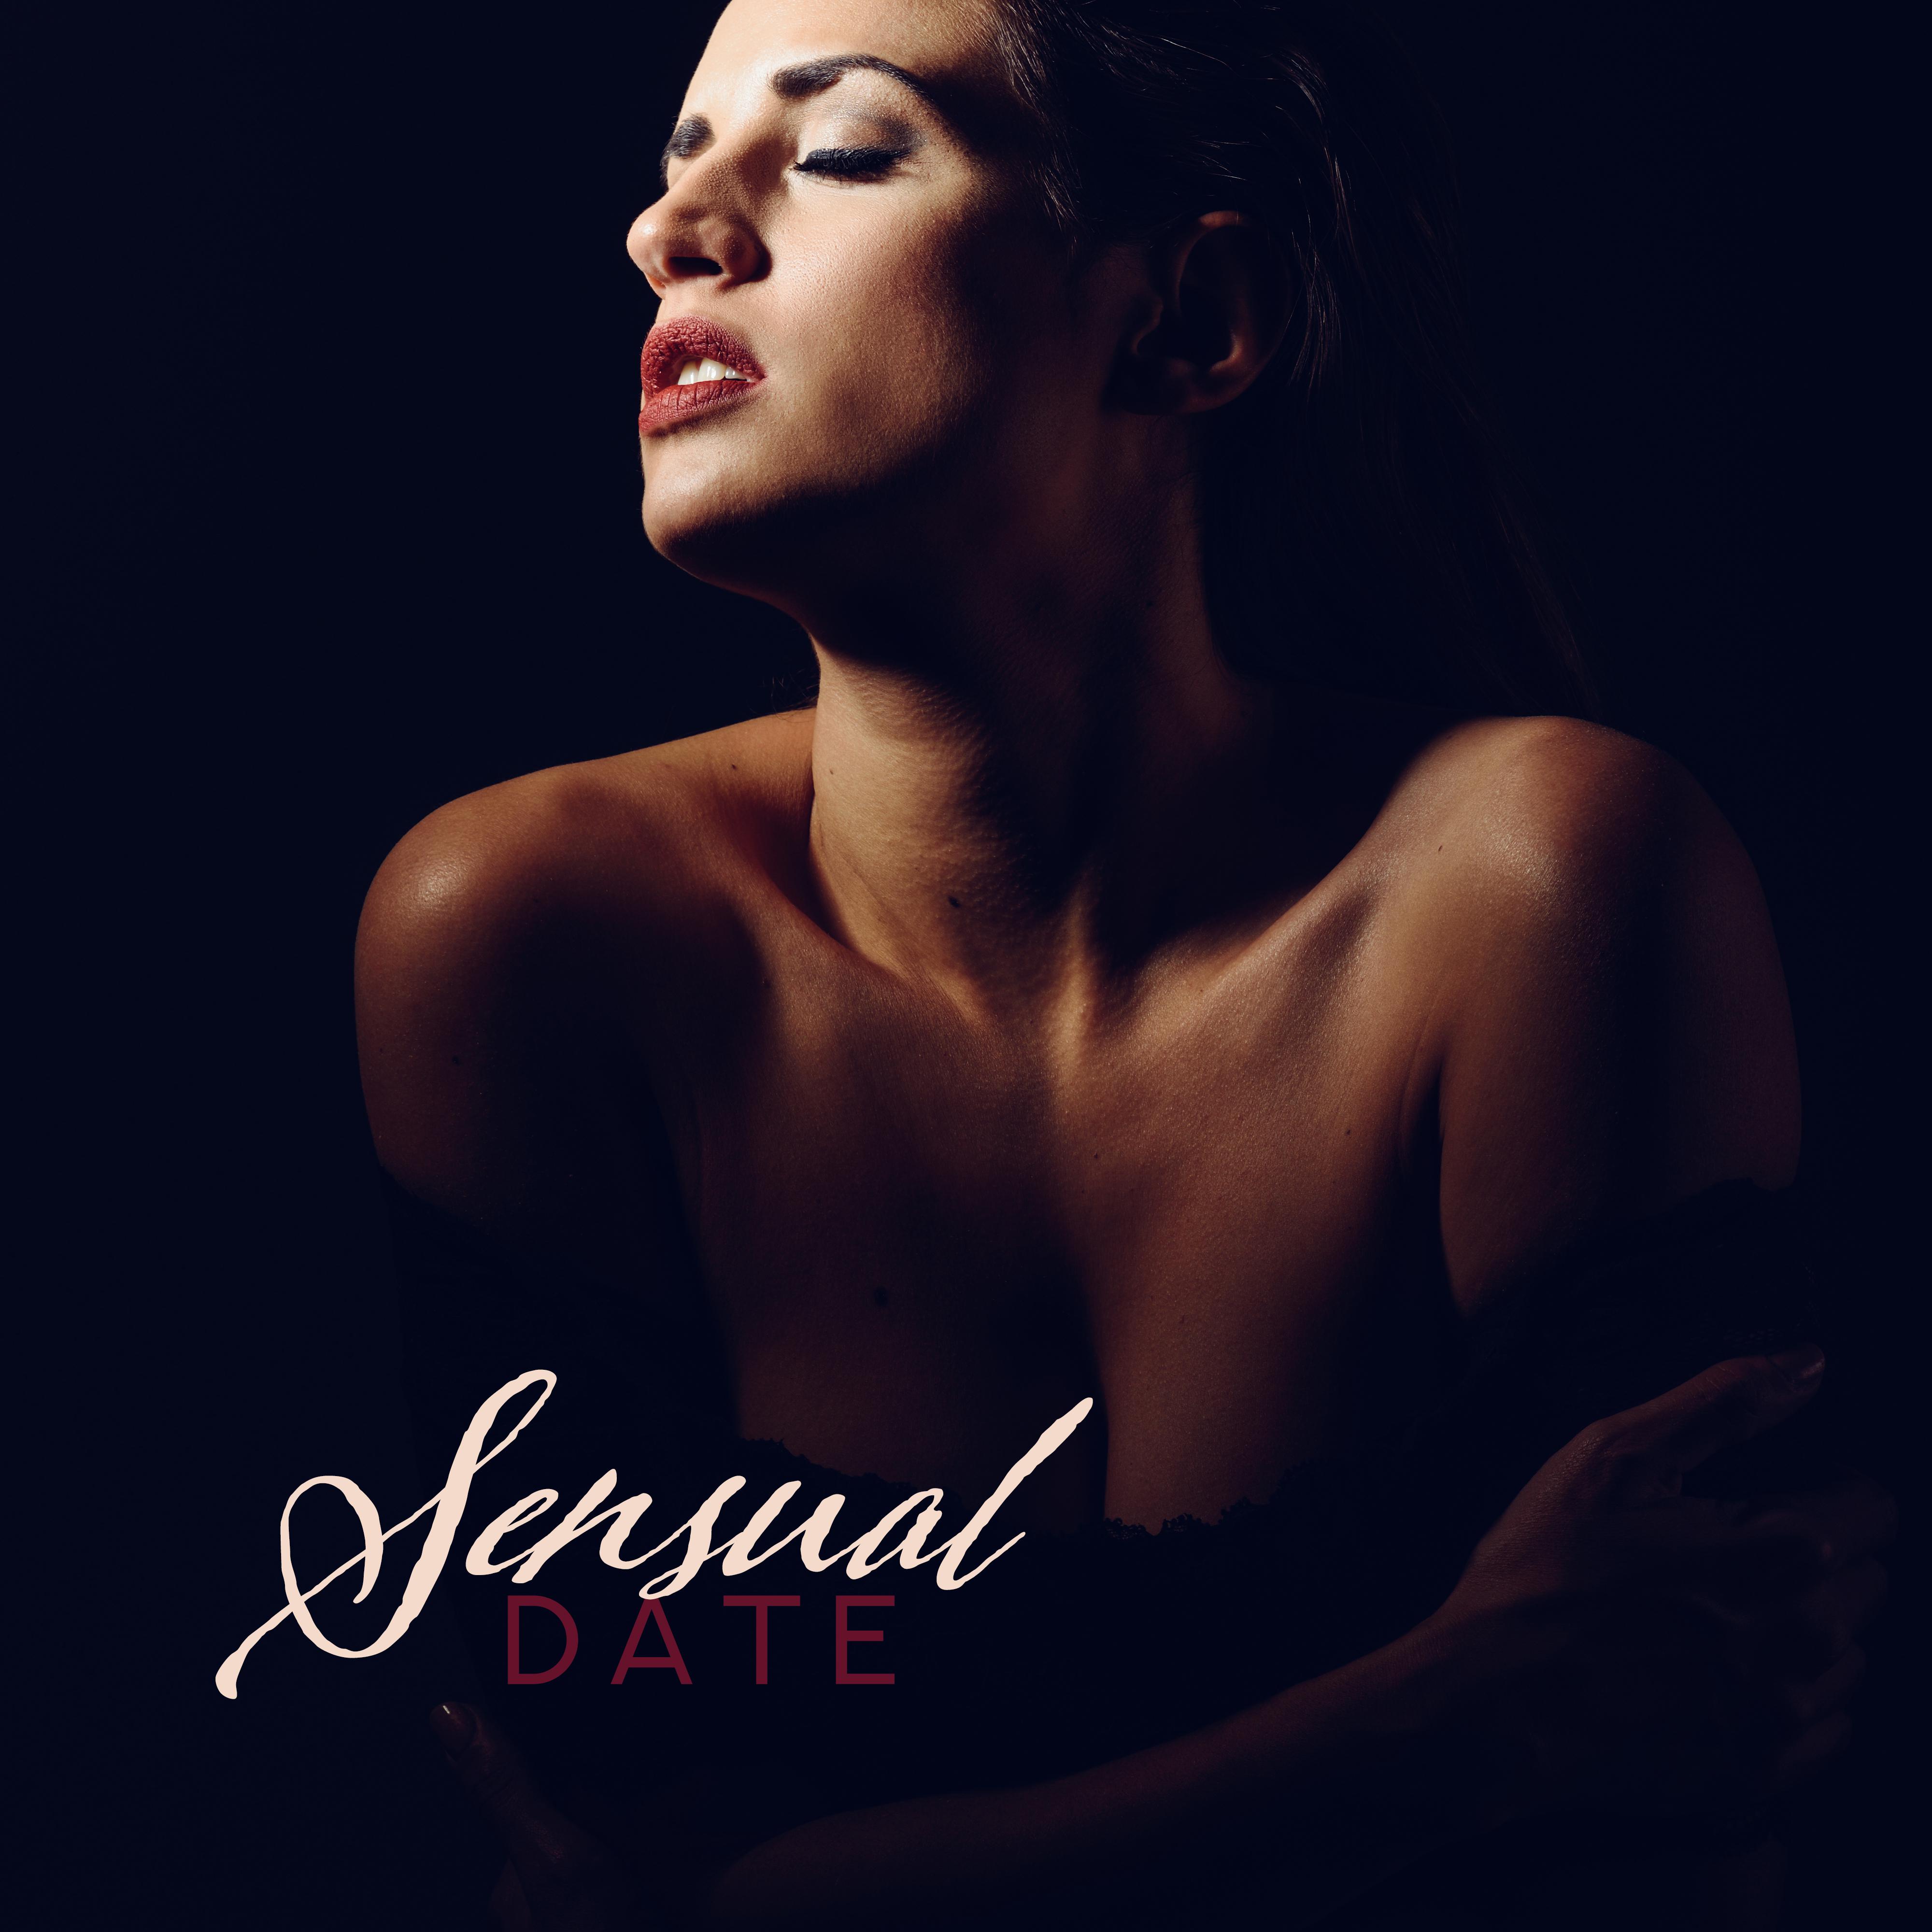 Sensual Date: Romantic Jazz 2019, Instrumental Sounds for Lovers, Romantic Time, Relaxing Jazz at Night